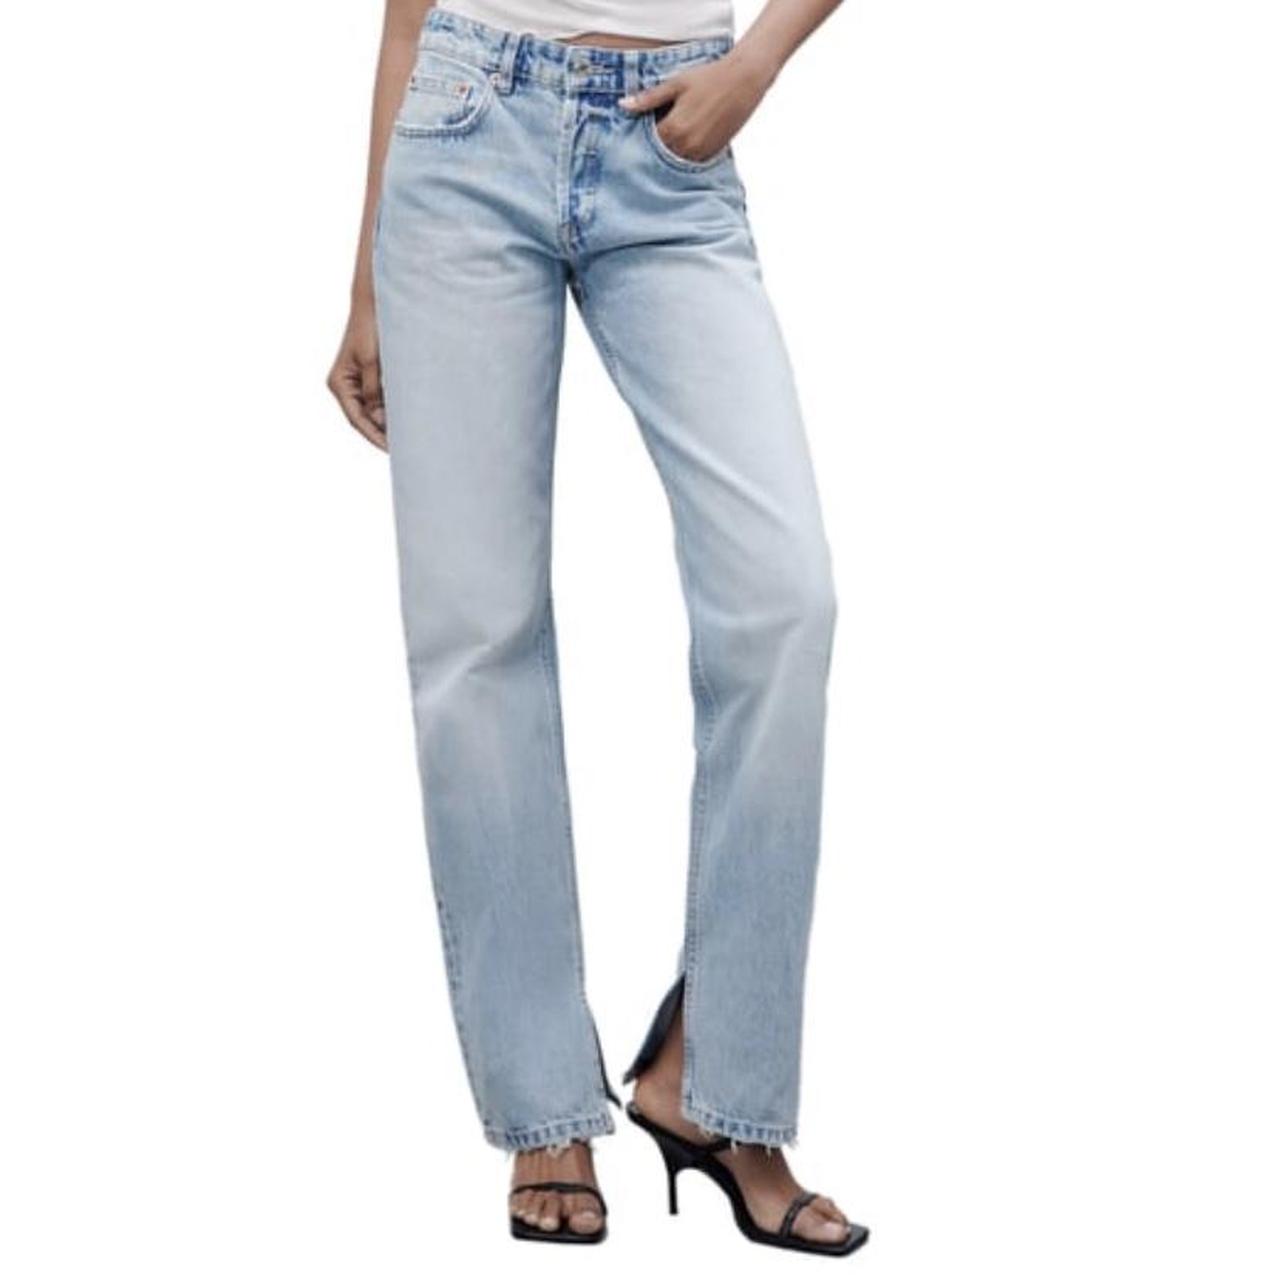 TRF STRAIGHT LOW-RISE JEANS - Light blue